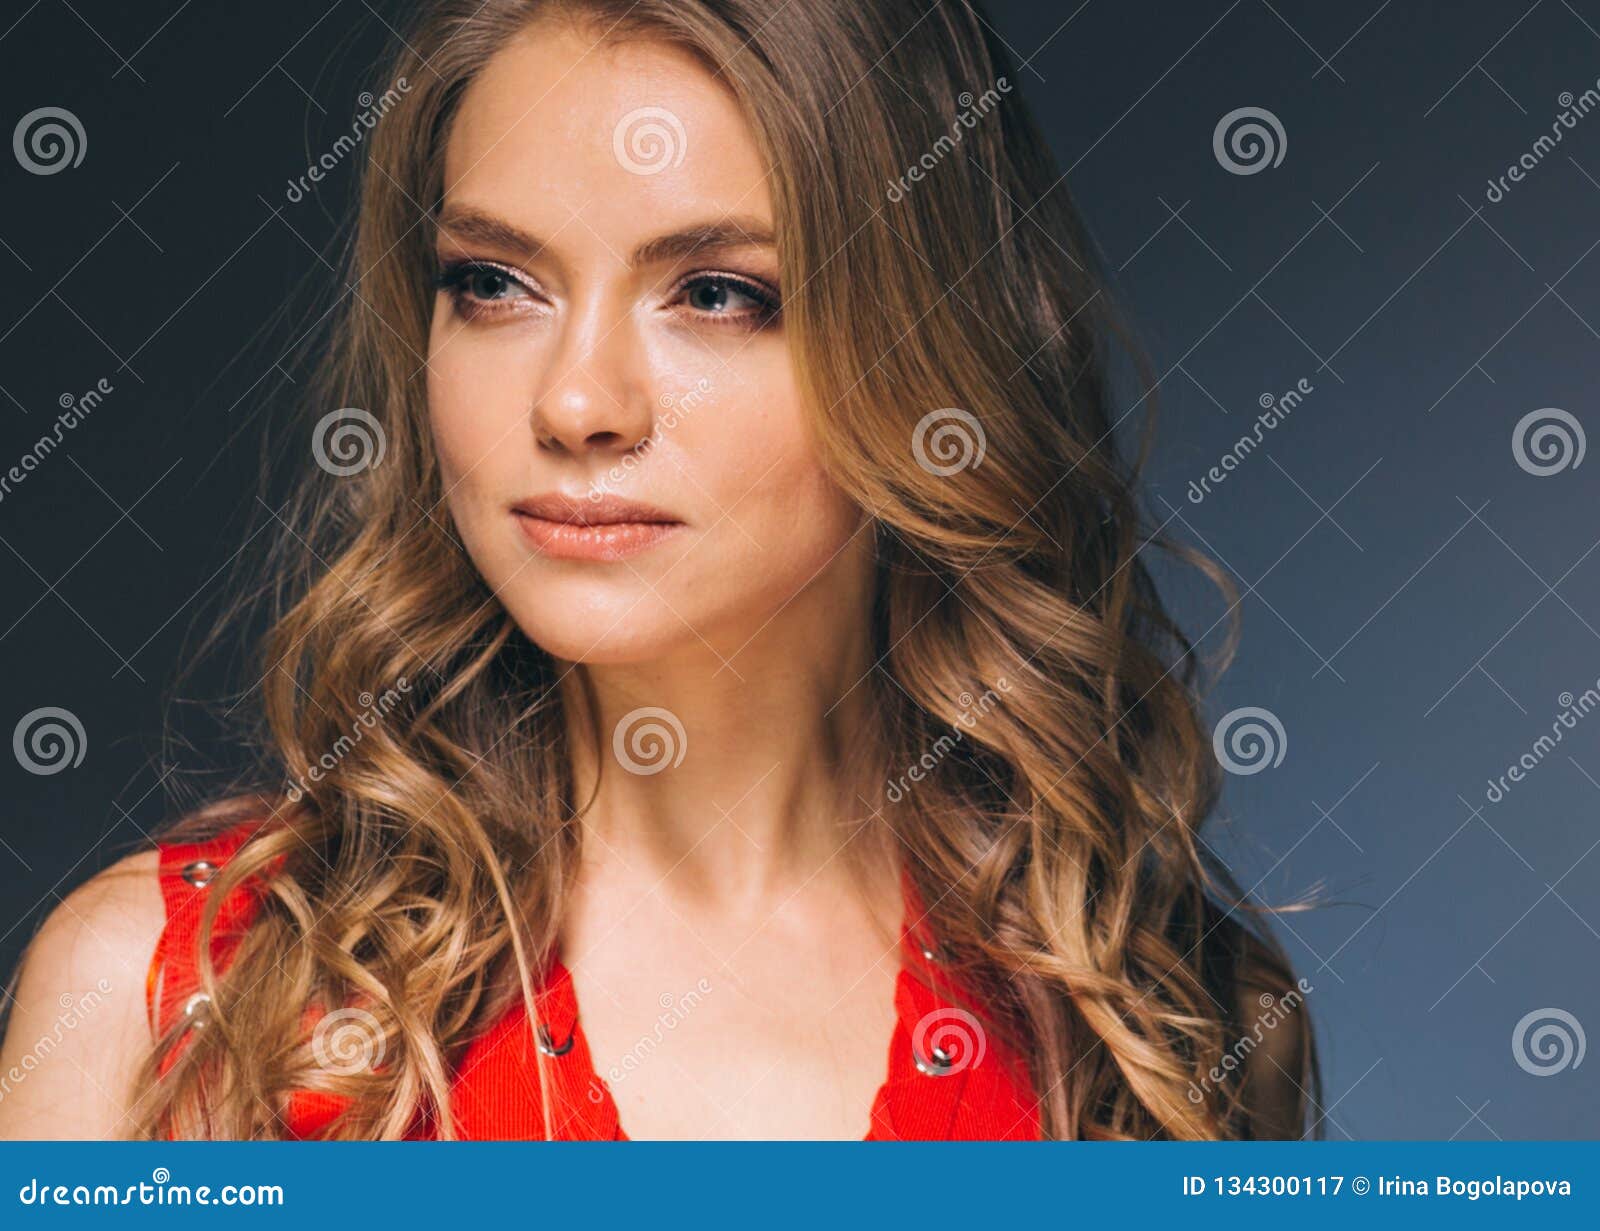 Woman in Red Dress with Long Blonde Hair Stock Image - Image of breast ...